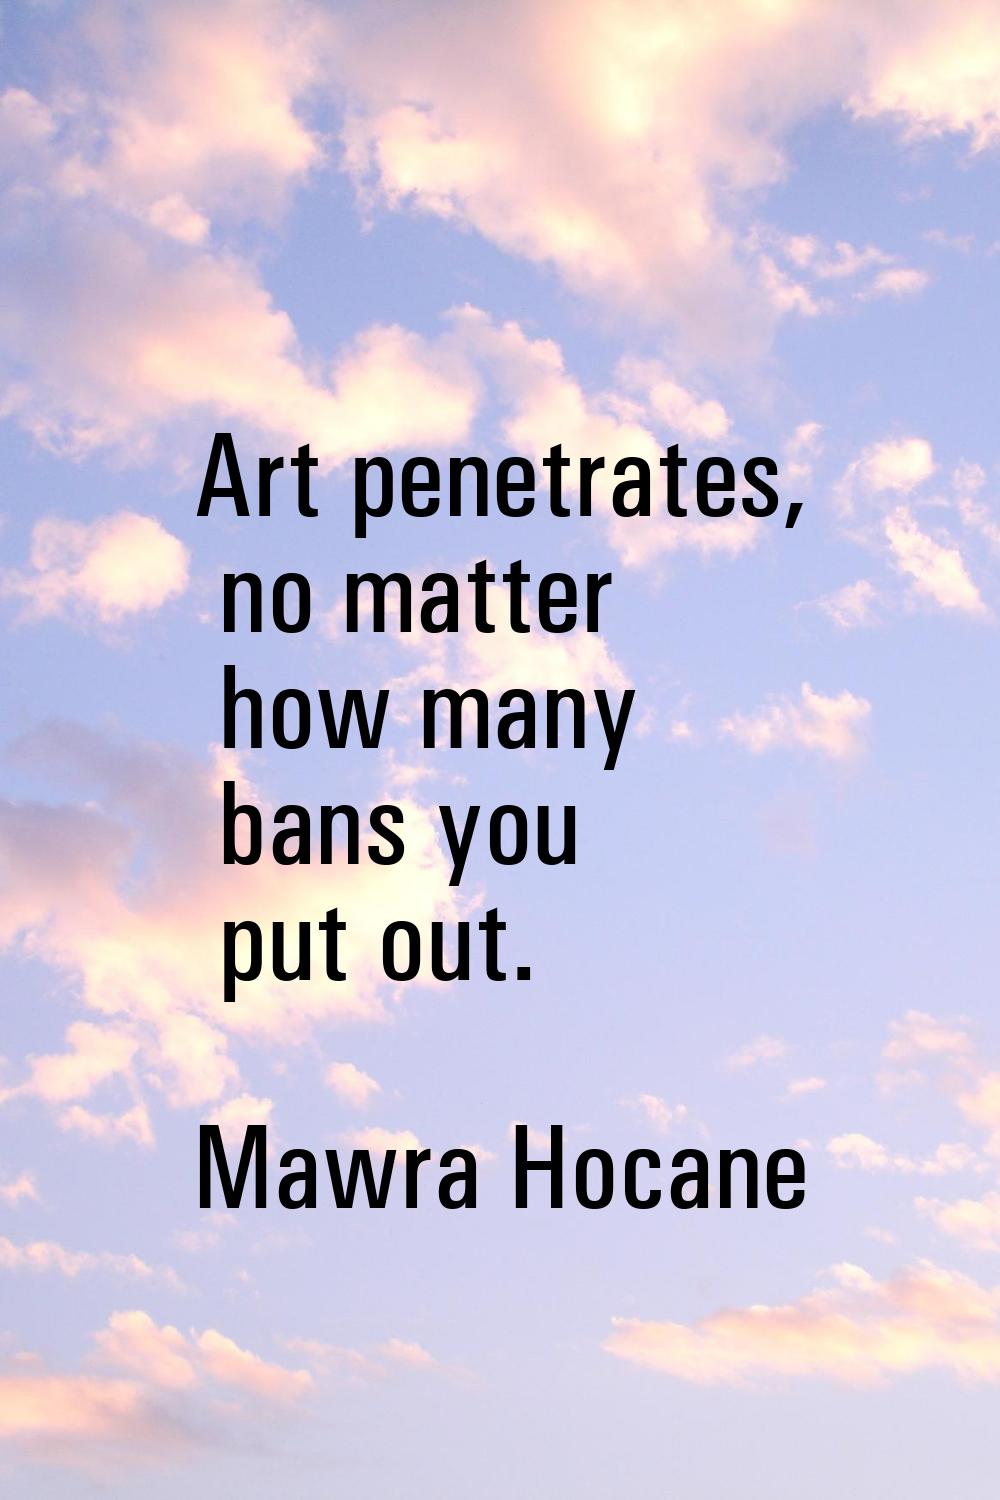 Art penetrates, no matter how many bans you put out.